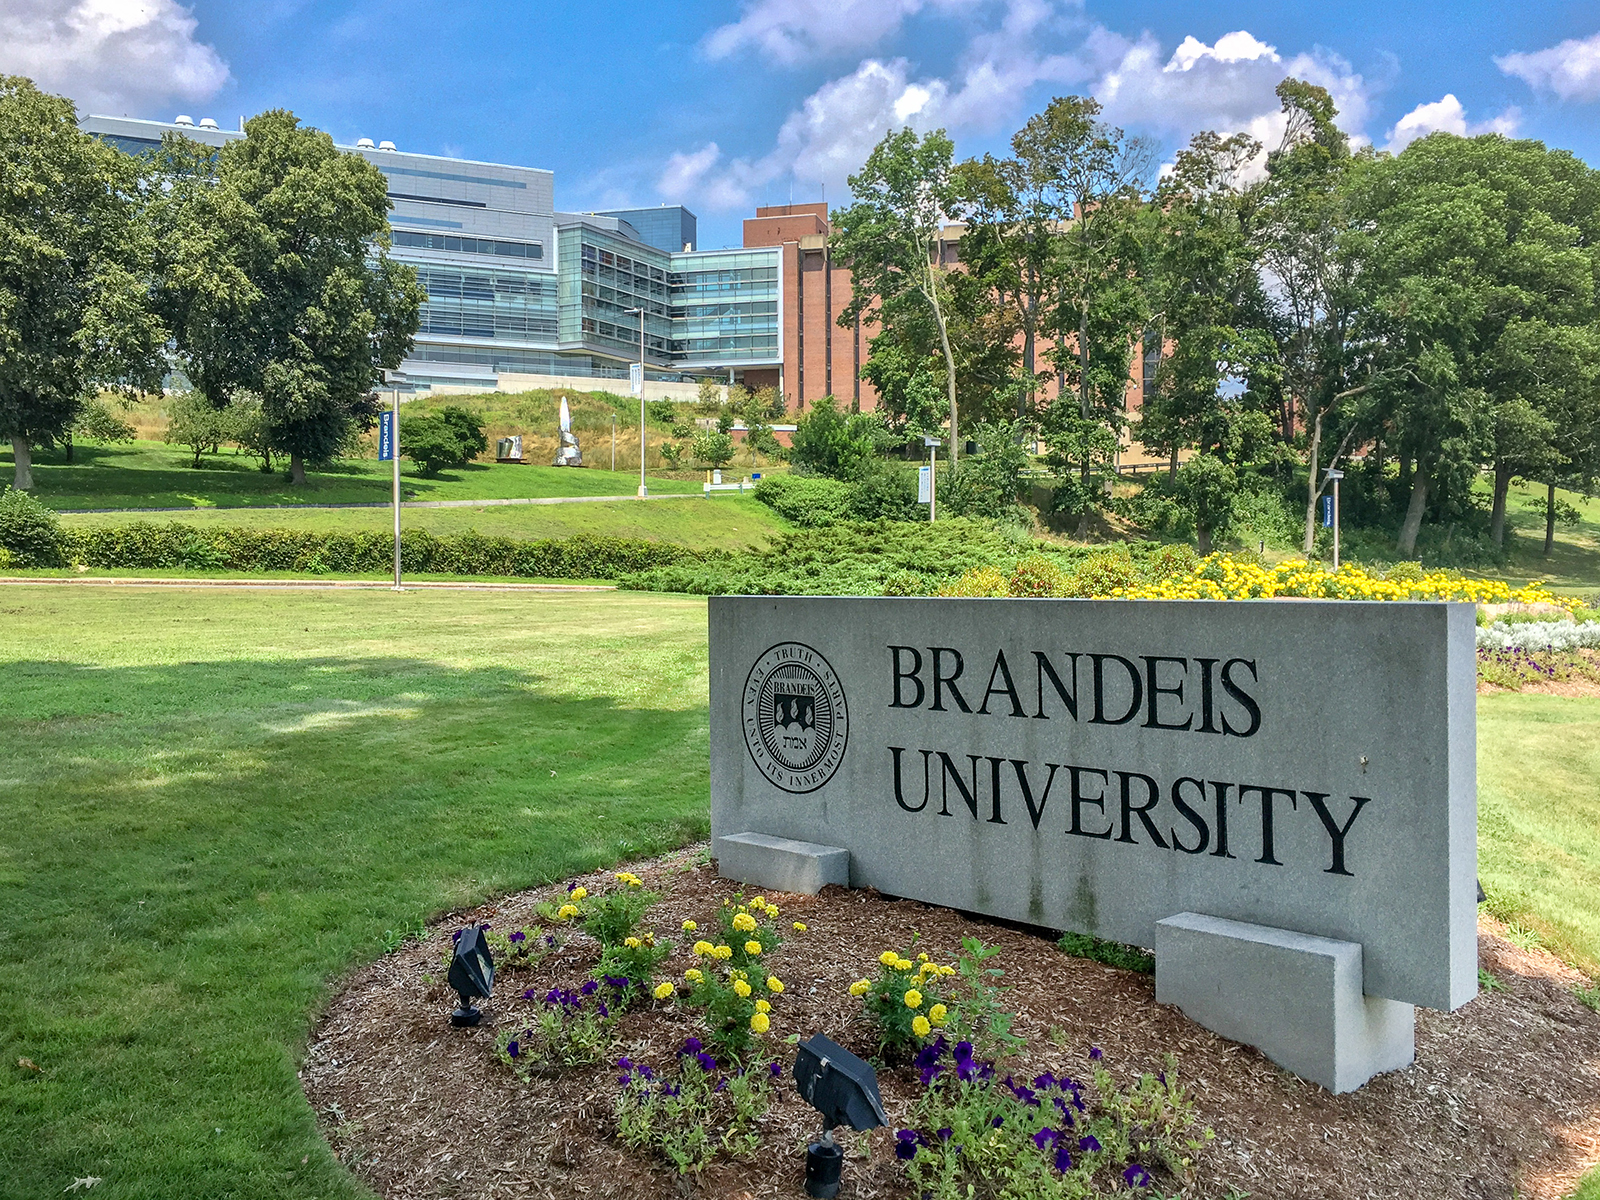 A sign marks the entrance of Brandeis University in Waltham, Massachusetts, on Aug. 7, 2018. (Photo by Kenneth C. Zirkel/Creative Commons)